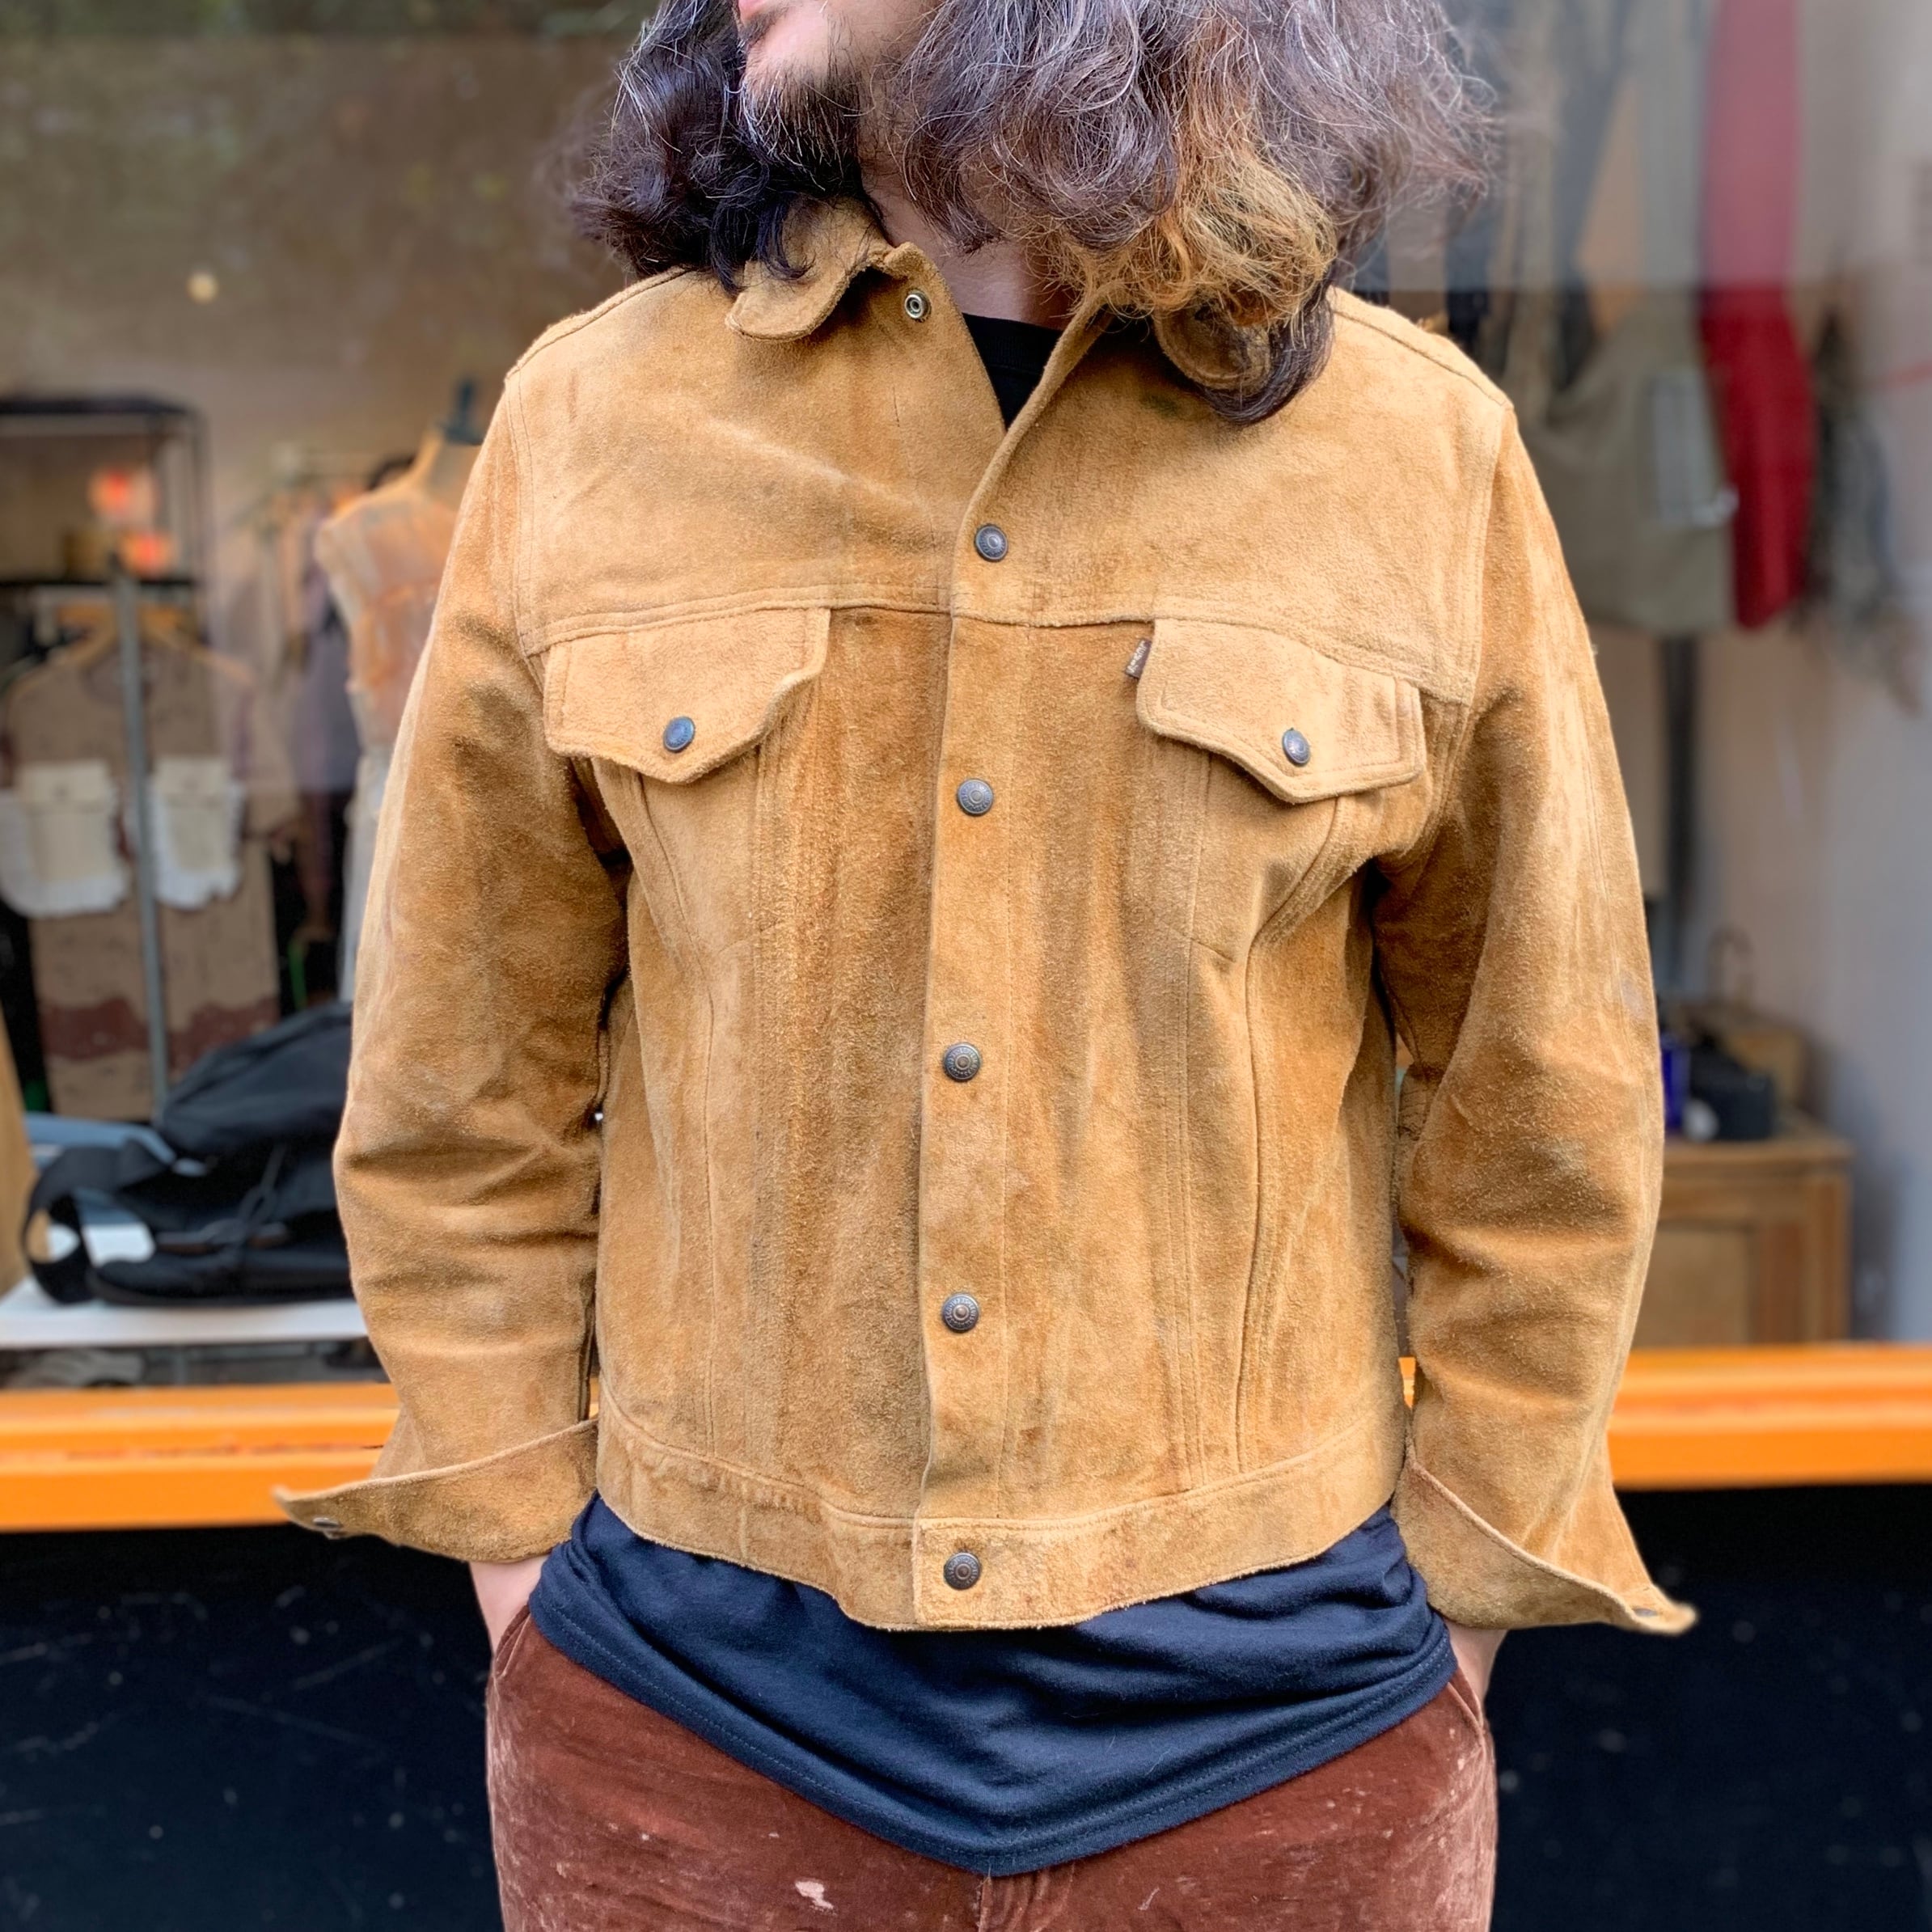 60's Levi's suede leather jacket 3rd type | coug（カーグ）｜熊本県